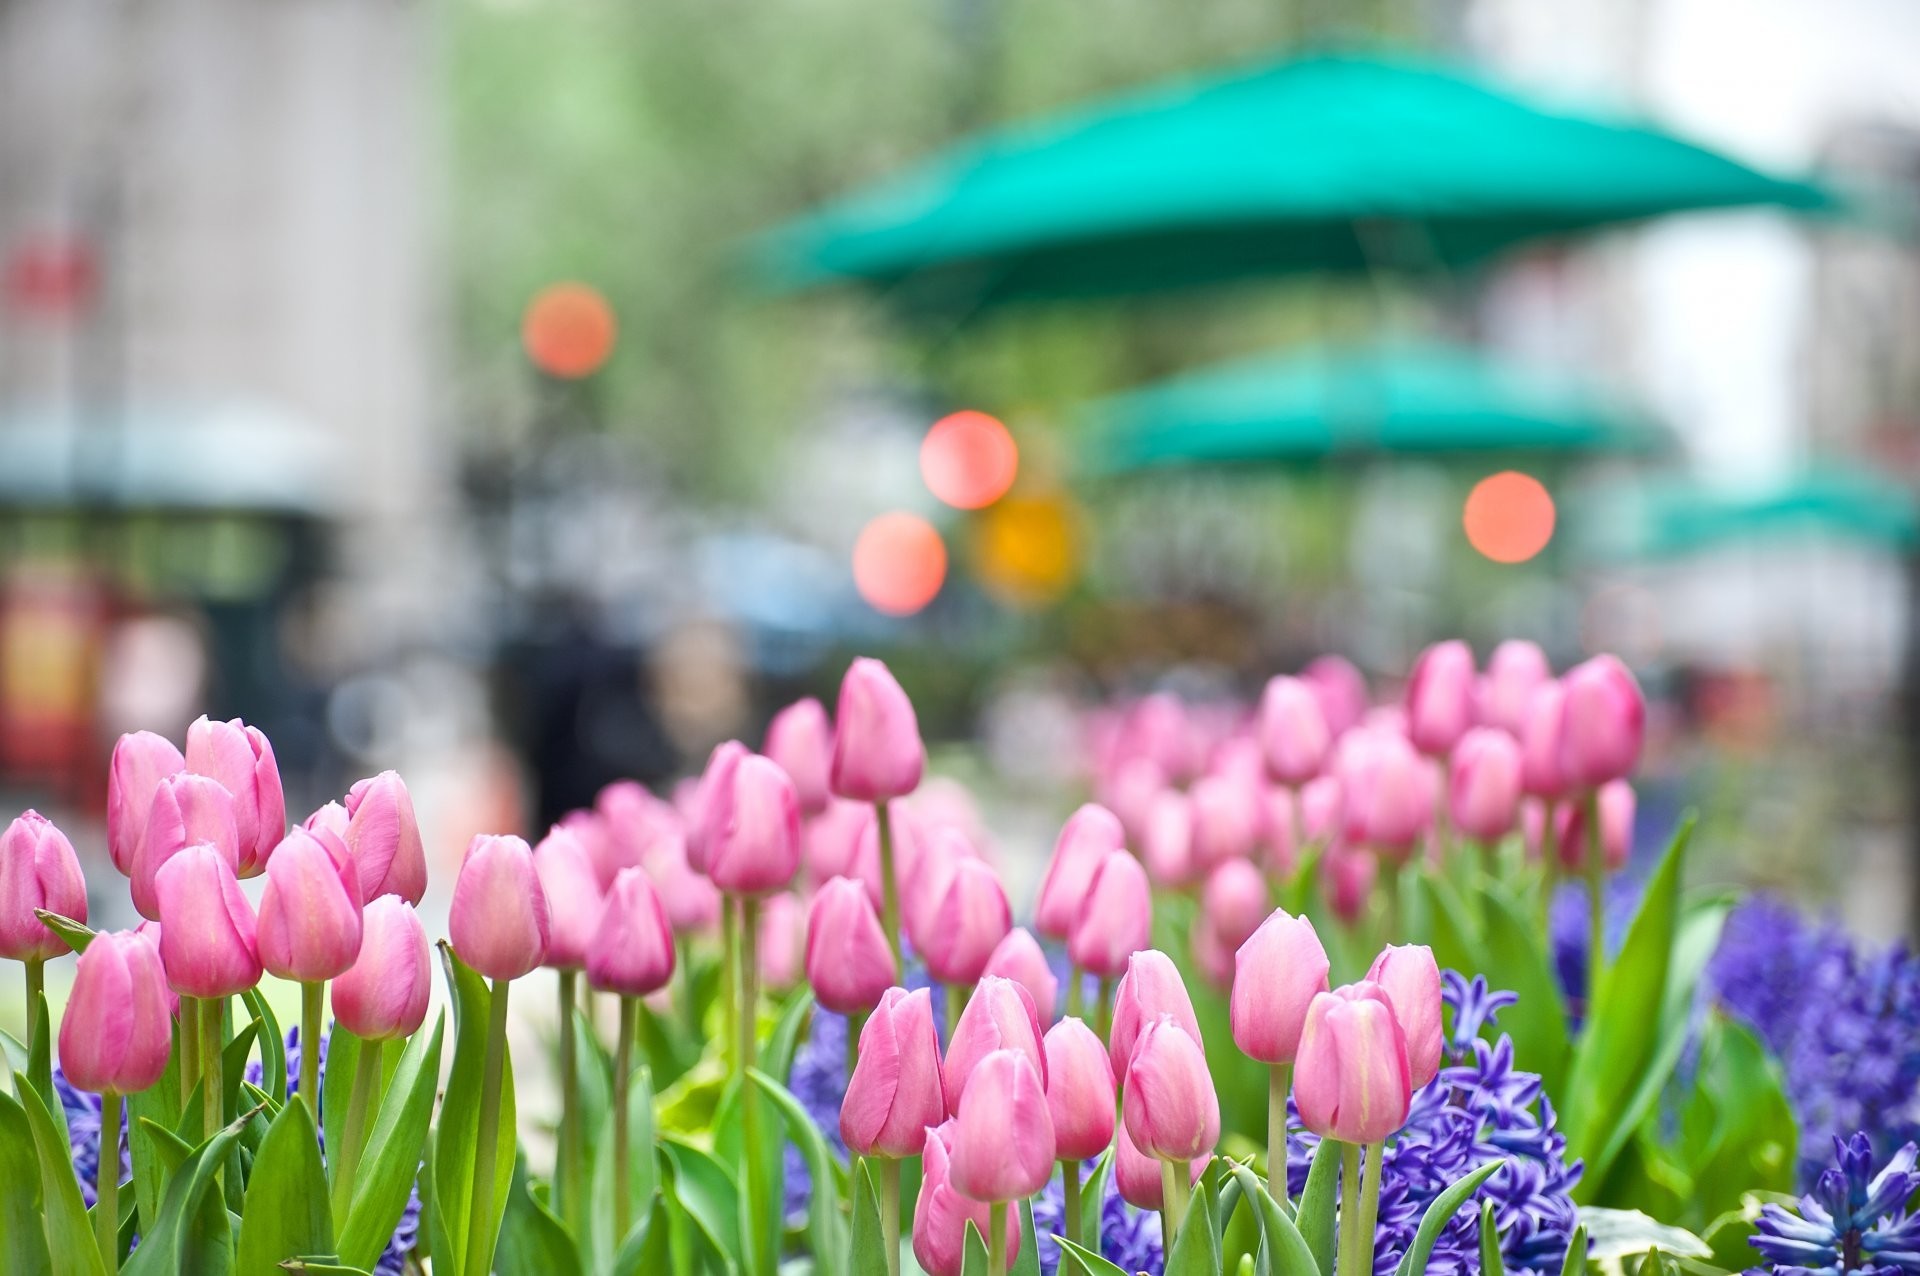 1920x1276 tulips pink flower bud hyacinth bed town street lights reflections light  nature spring close up